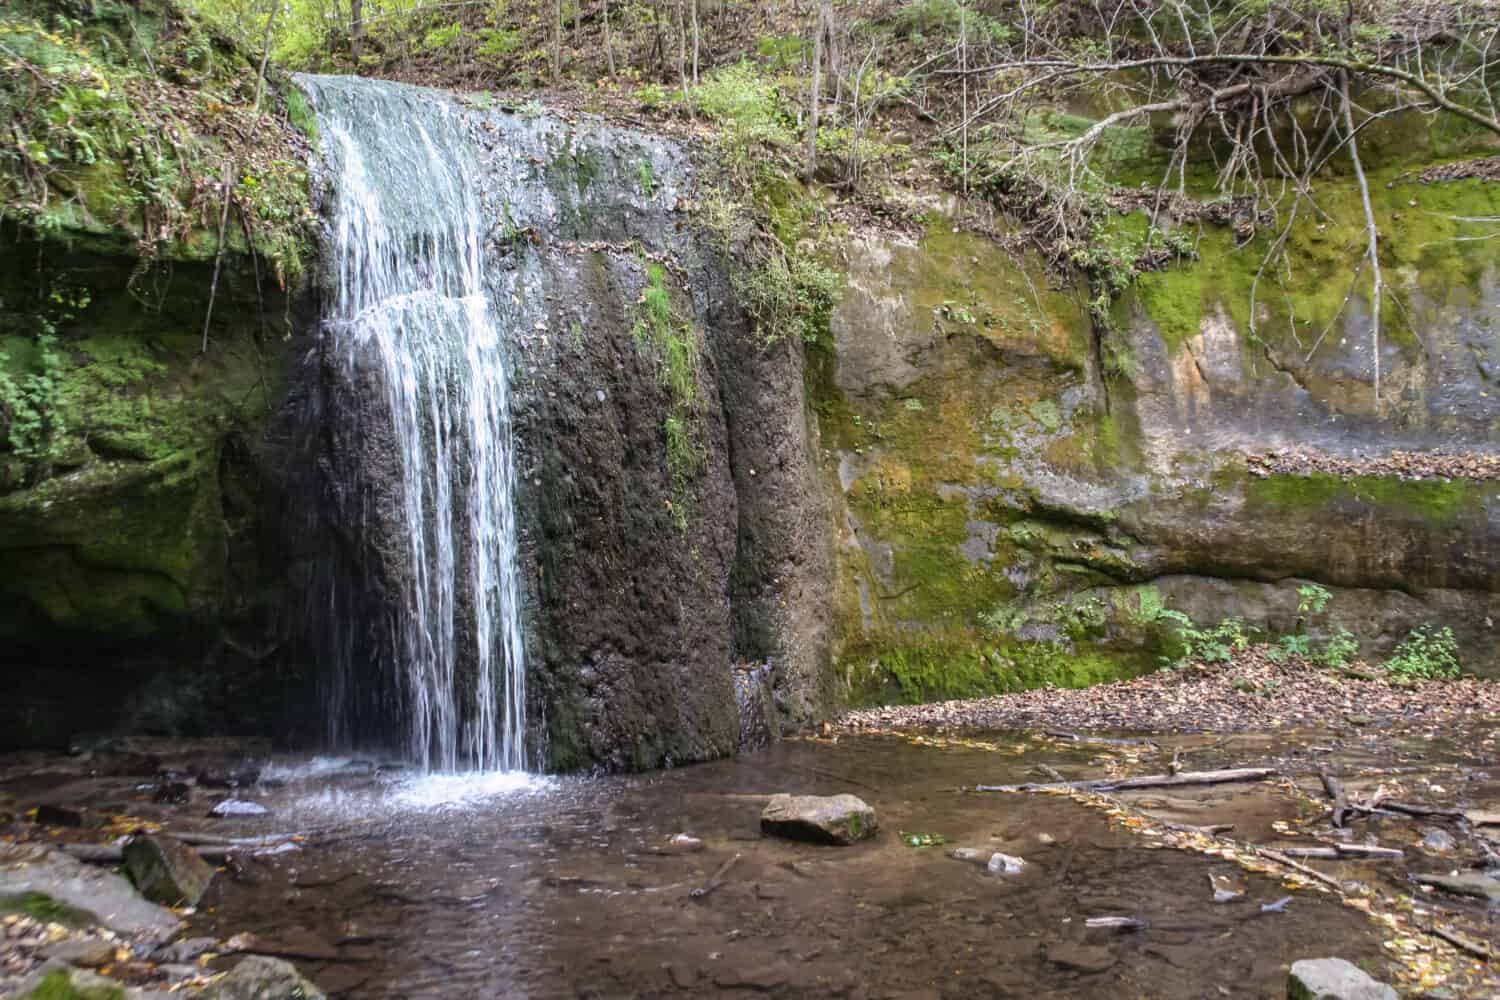 Picture of the iconic waterfall at Governor Dodge State Park in Wisconsin that I took while out hiking.